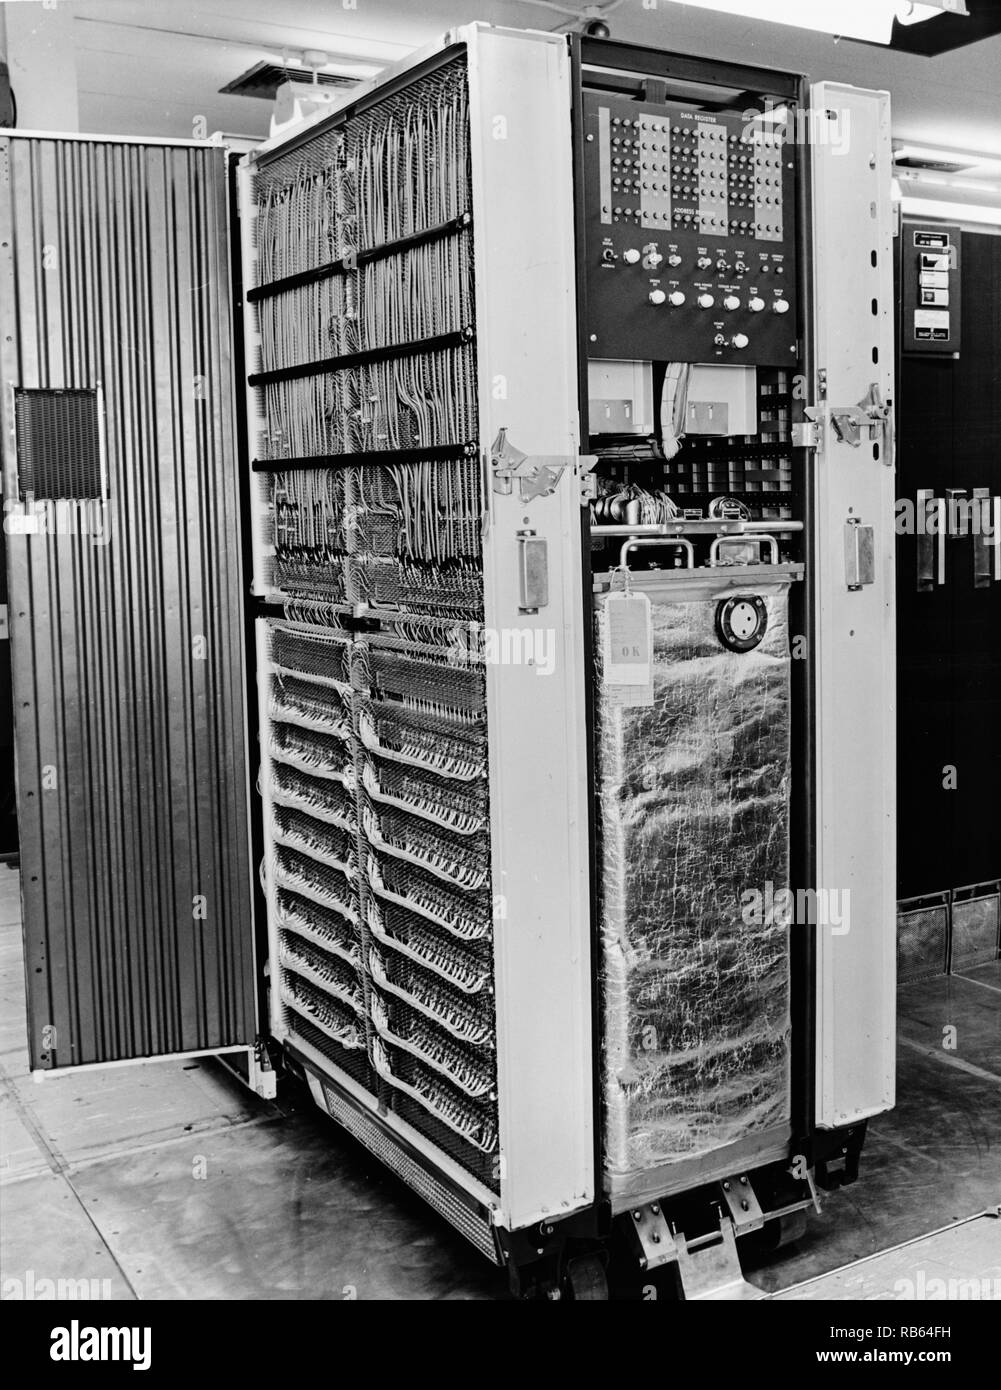 View of IBM digital computer model 7090 magnet core installation. ITT Artic Services, Inc., Official photograph BMEWS Site II, Clear, AK, by unknown photographer, 17 September 1965. Clear Air Force Station, Ballistic Missile Early Warning System Site II. Stock Photo